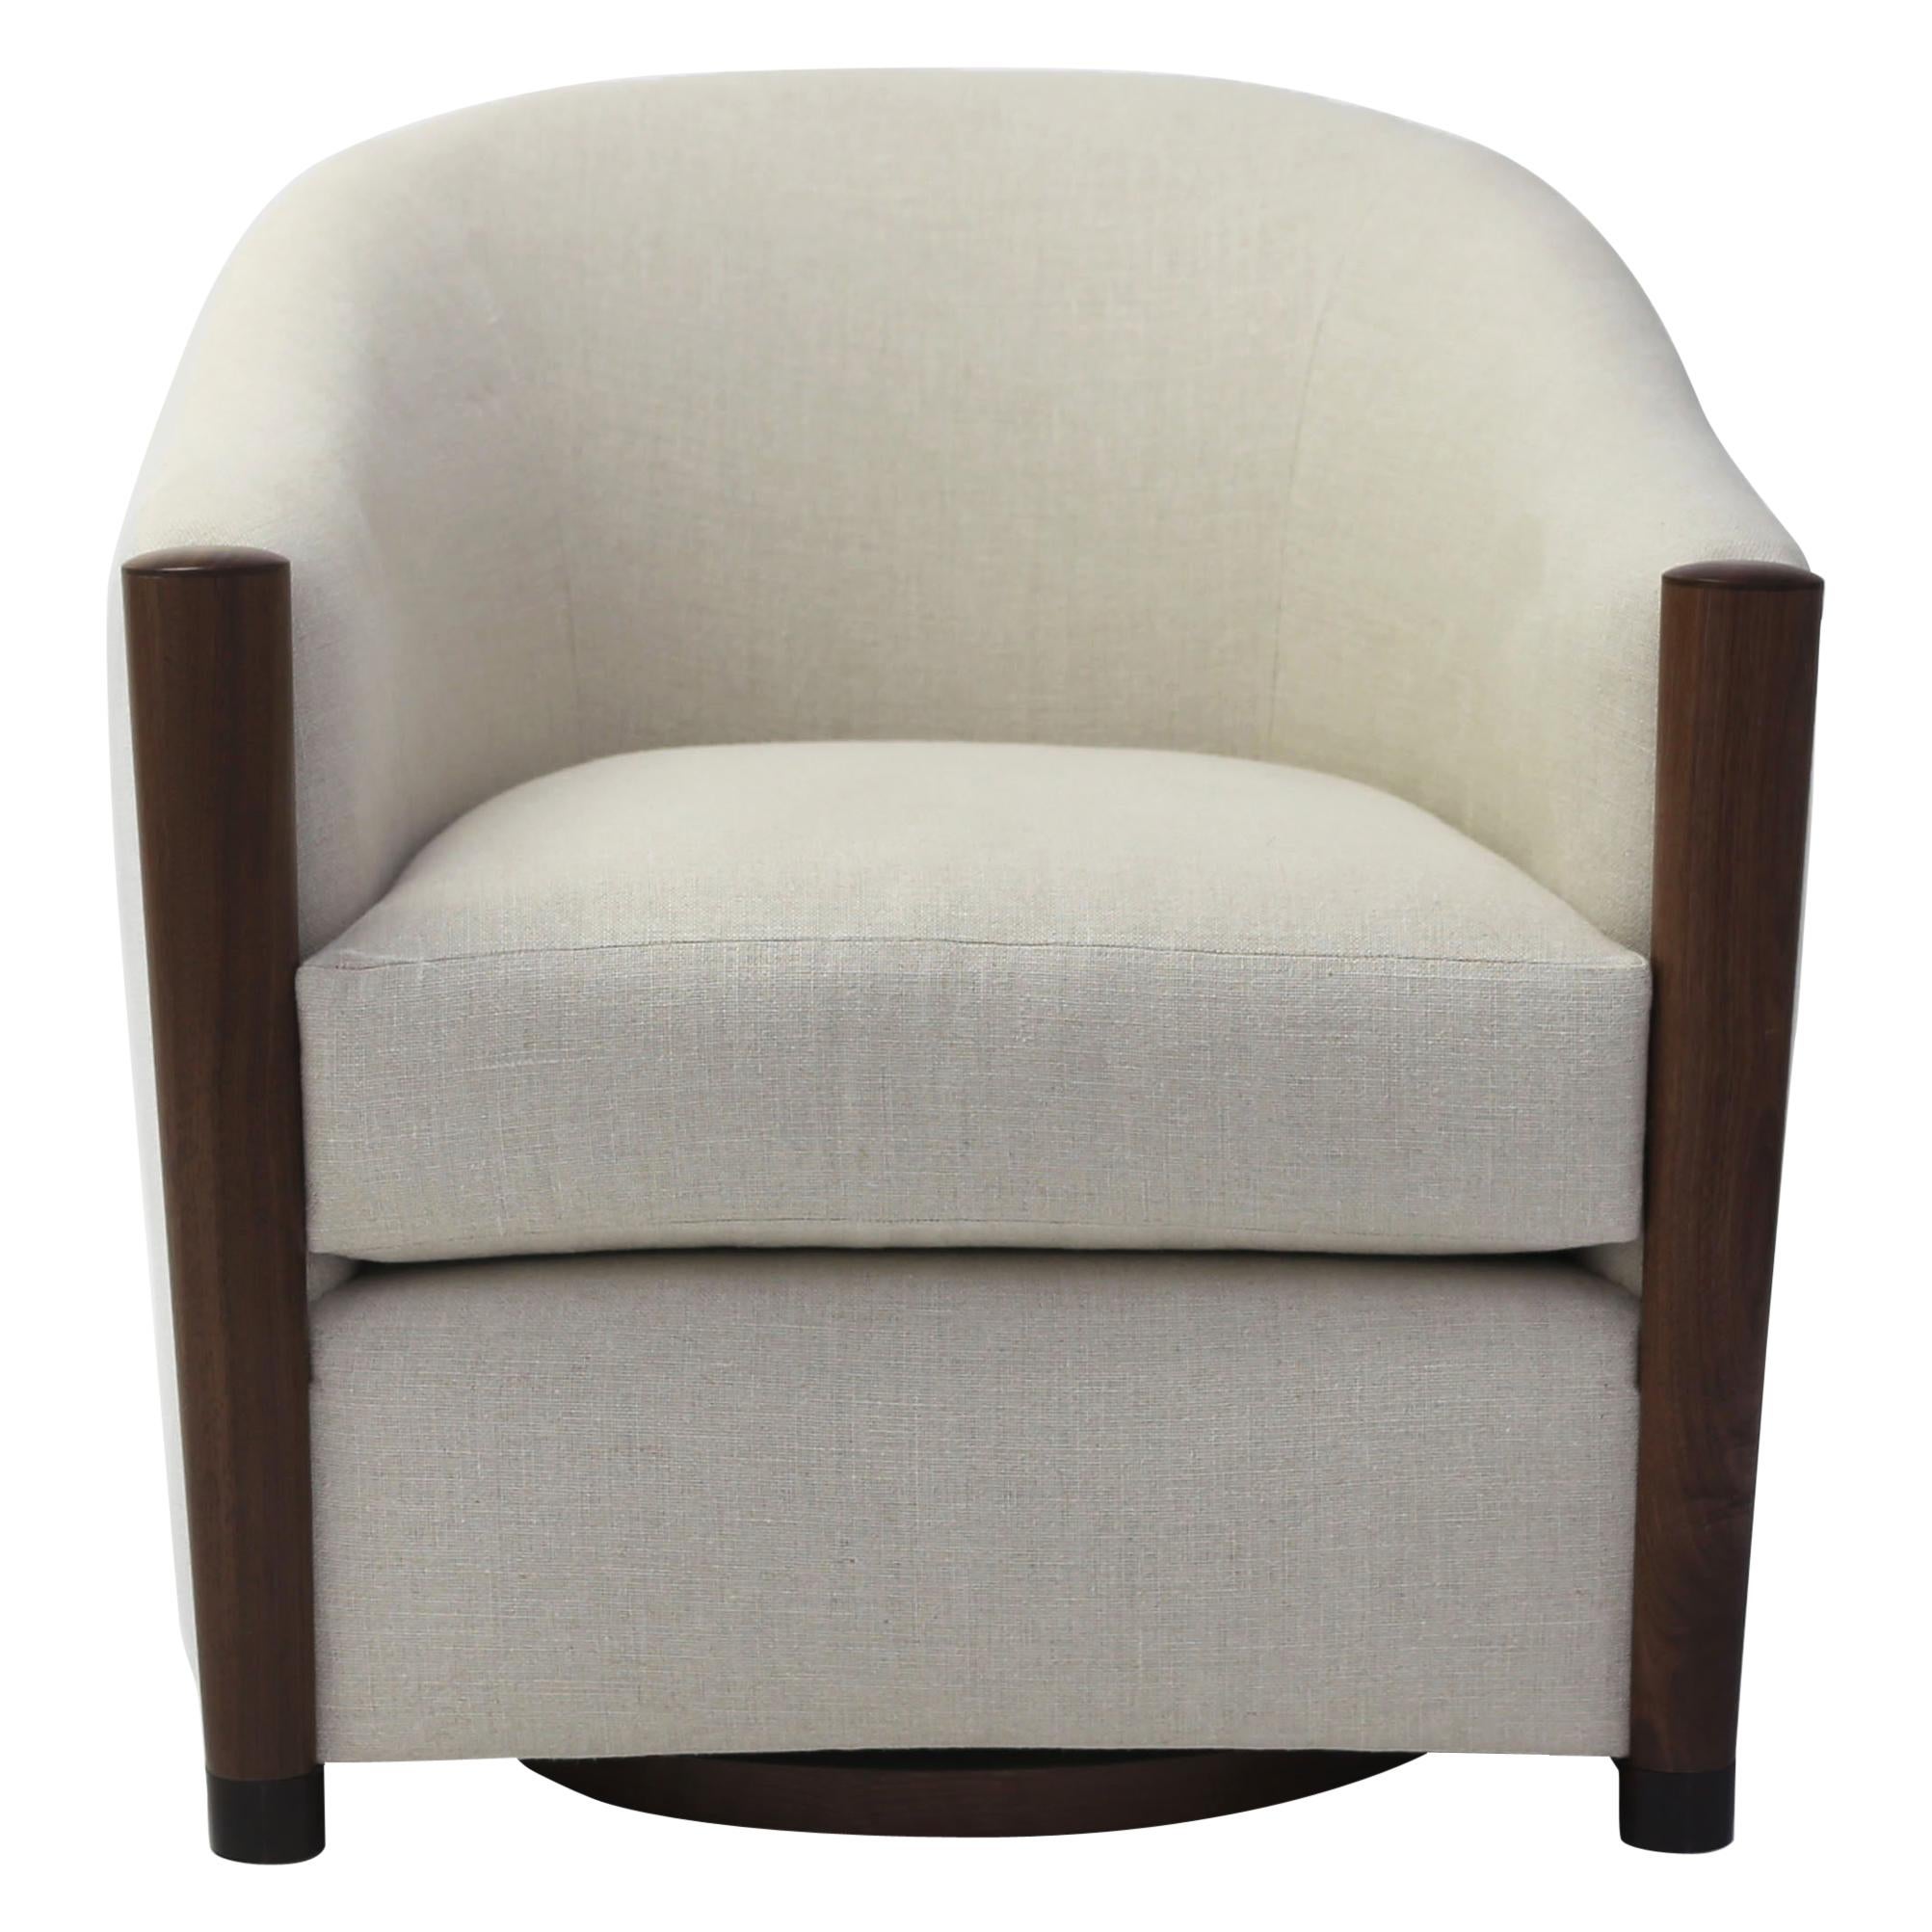 Rounded Tub Club Chair on Swivel Shown in Linen Fabric with Wood Arm Post Detail For Sale